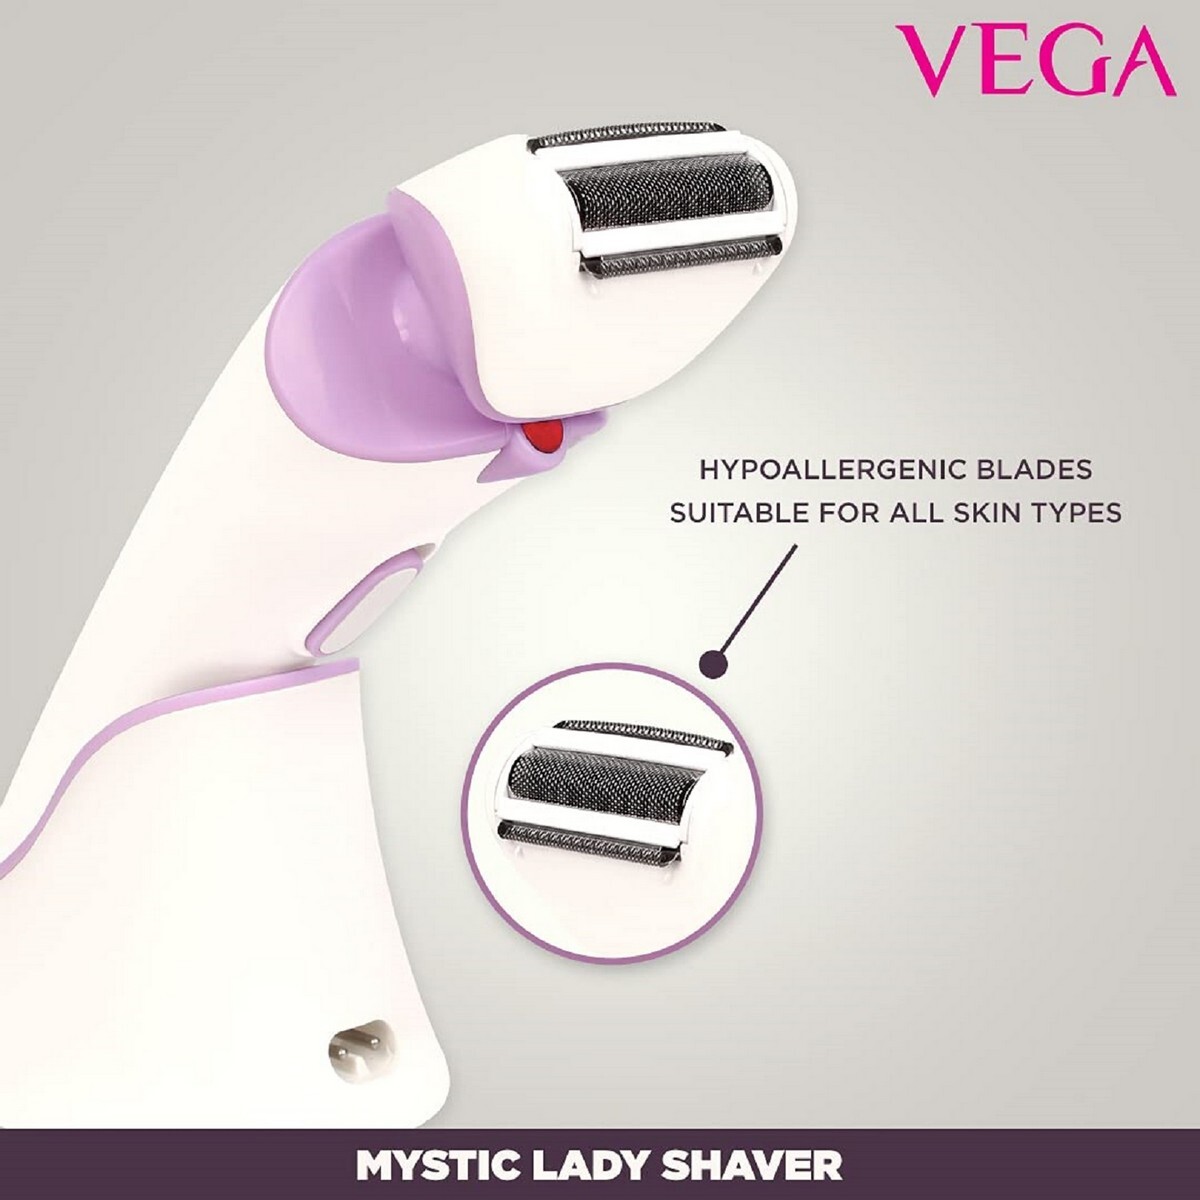 VEGA Mystic Lady Shaver For Women, 90 Mins Runtime with Quick Charge, IPX 6 Waterproof And Cord & Cordless Use